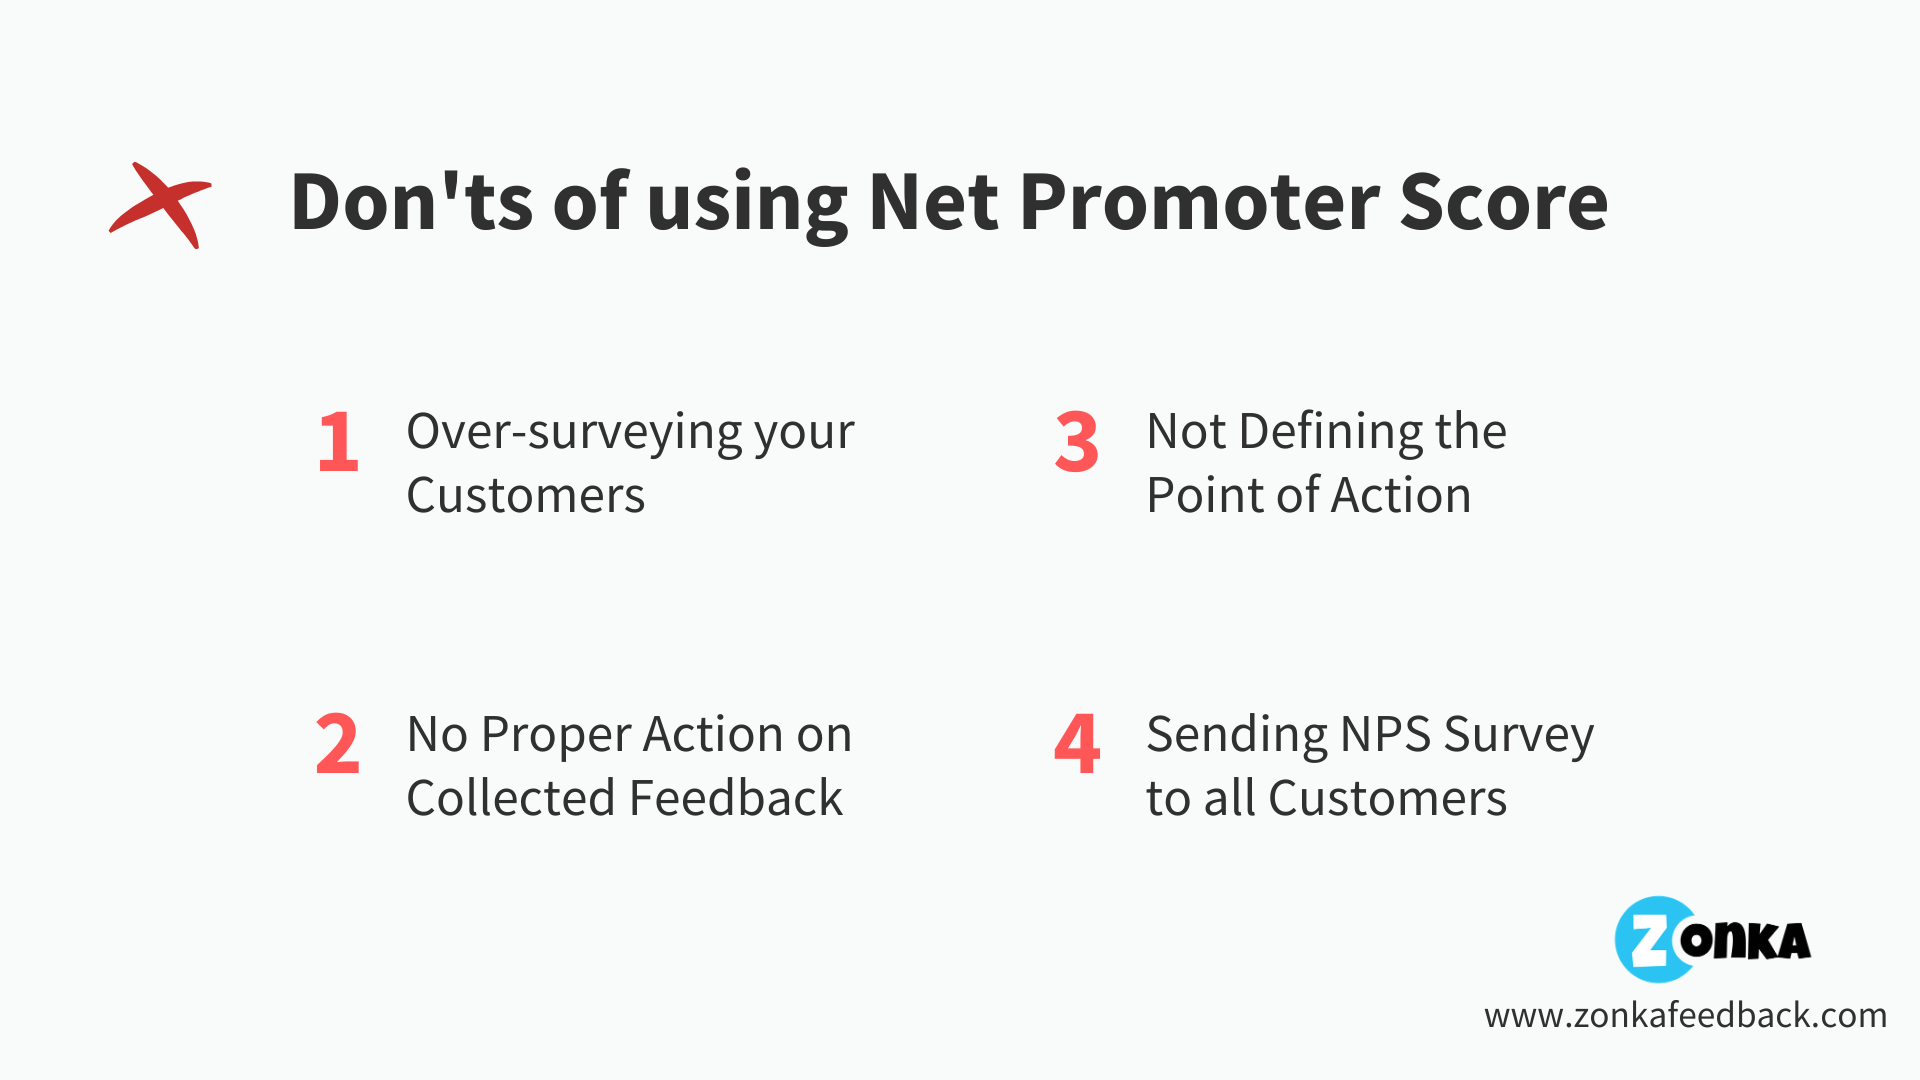 donts-of-using-net-promoter-score